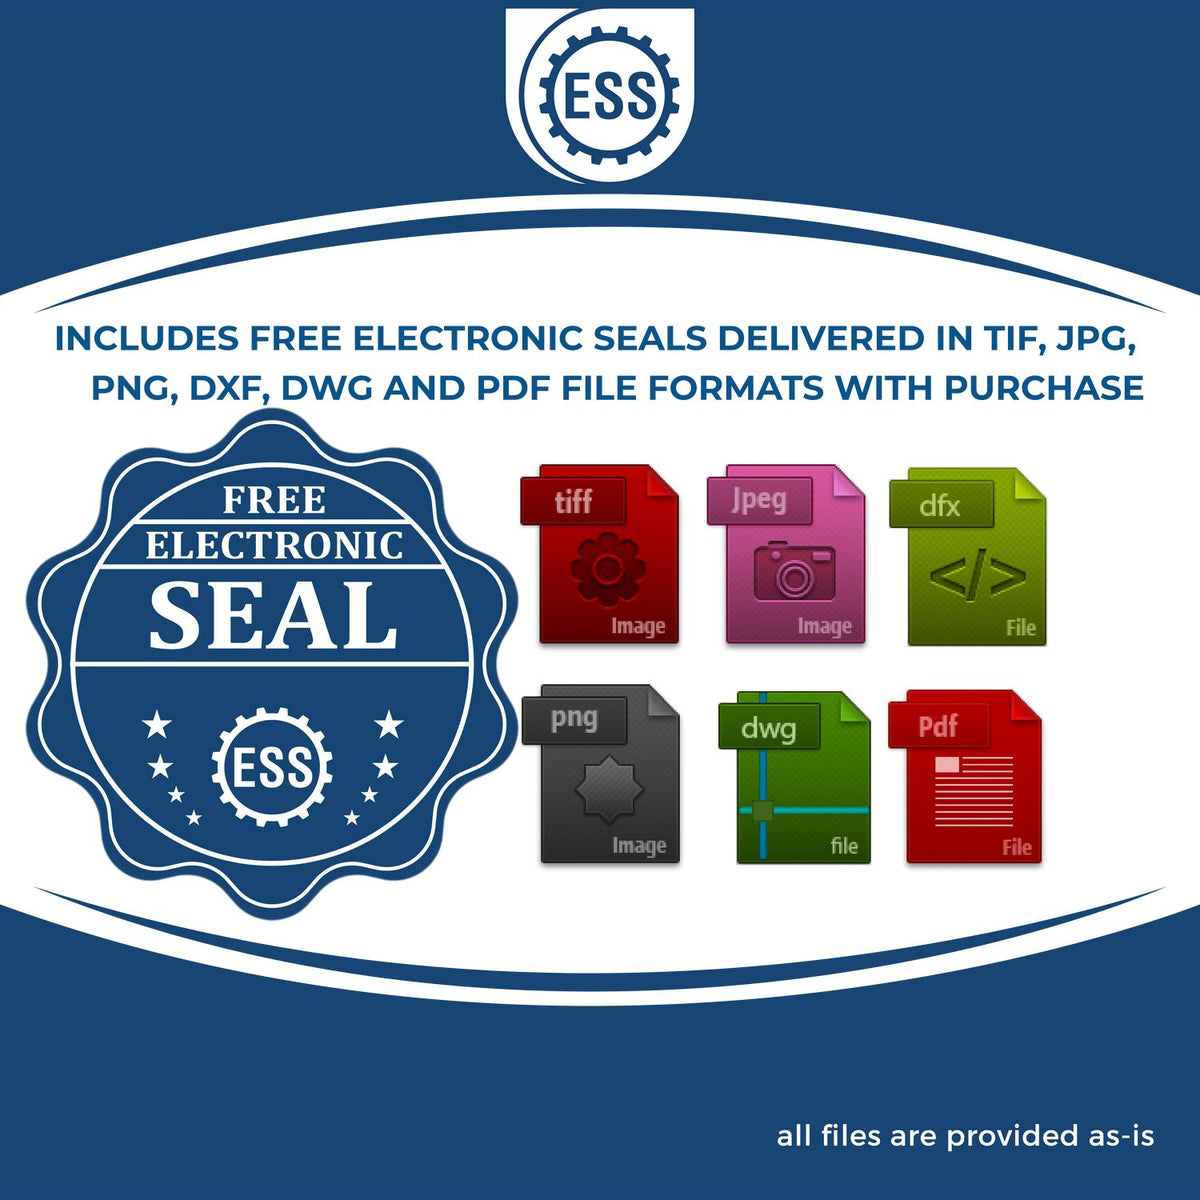 An infographic for the free electronic seal for the Extended Long Reach Georgia Architect Seal Embosser illustrating the different file type icons such as DXF, DWG, TIF, JPG and PNG.